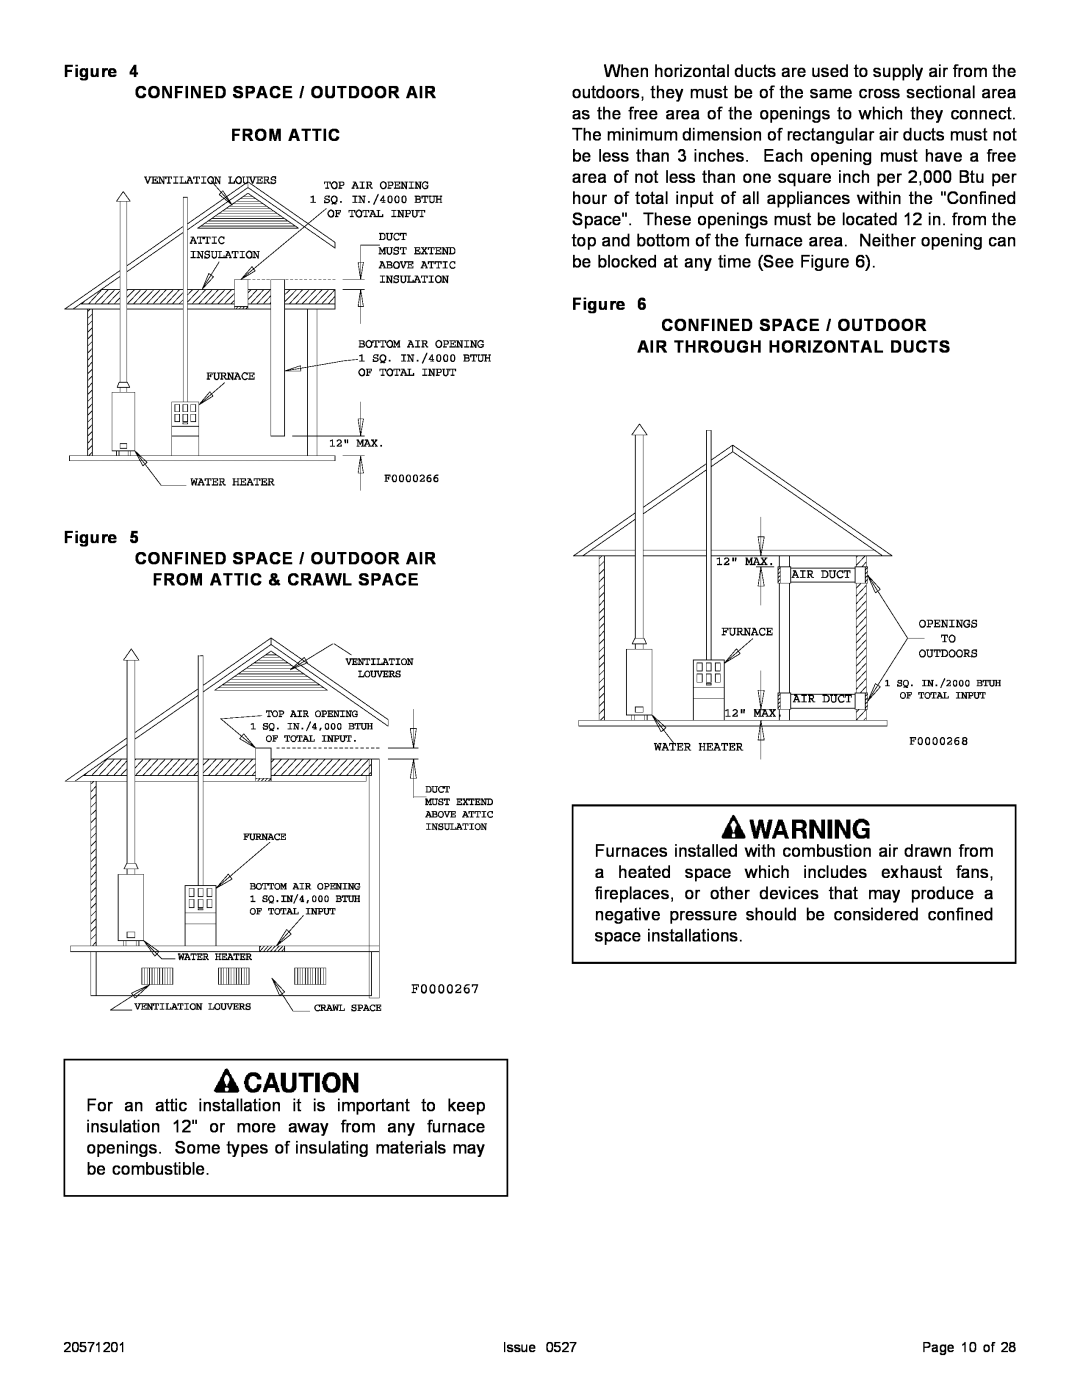 Allied Air Enterprises Upflow specifications Confined Space / Outdoor Air, From Attic, Air Through Horizontal Ducts 